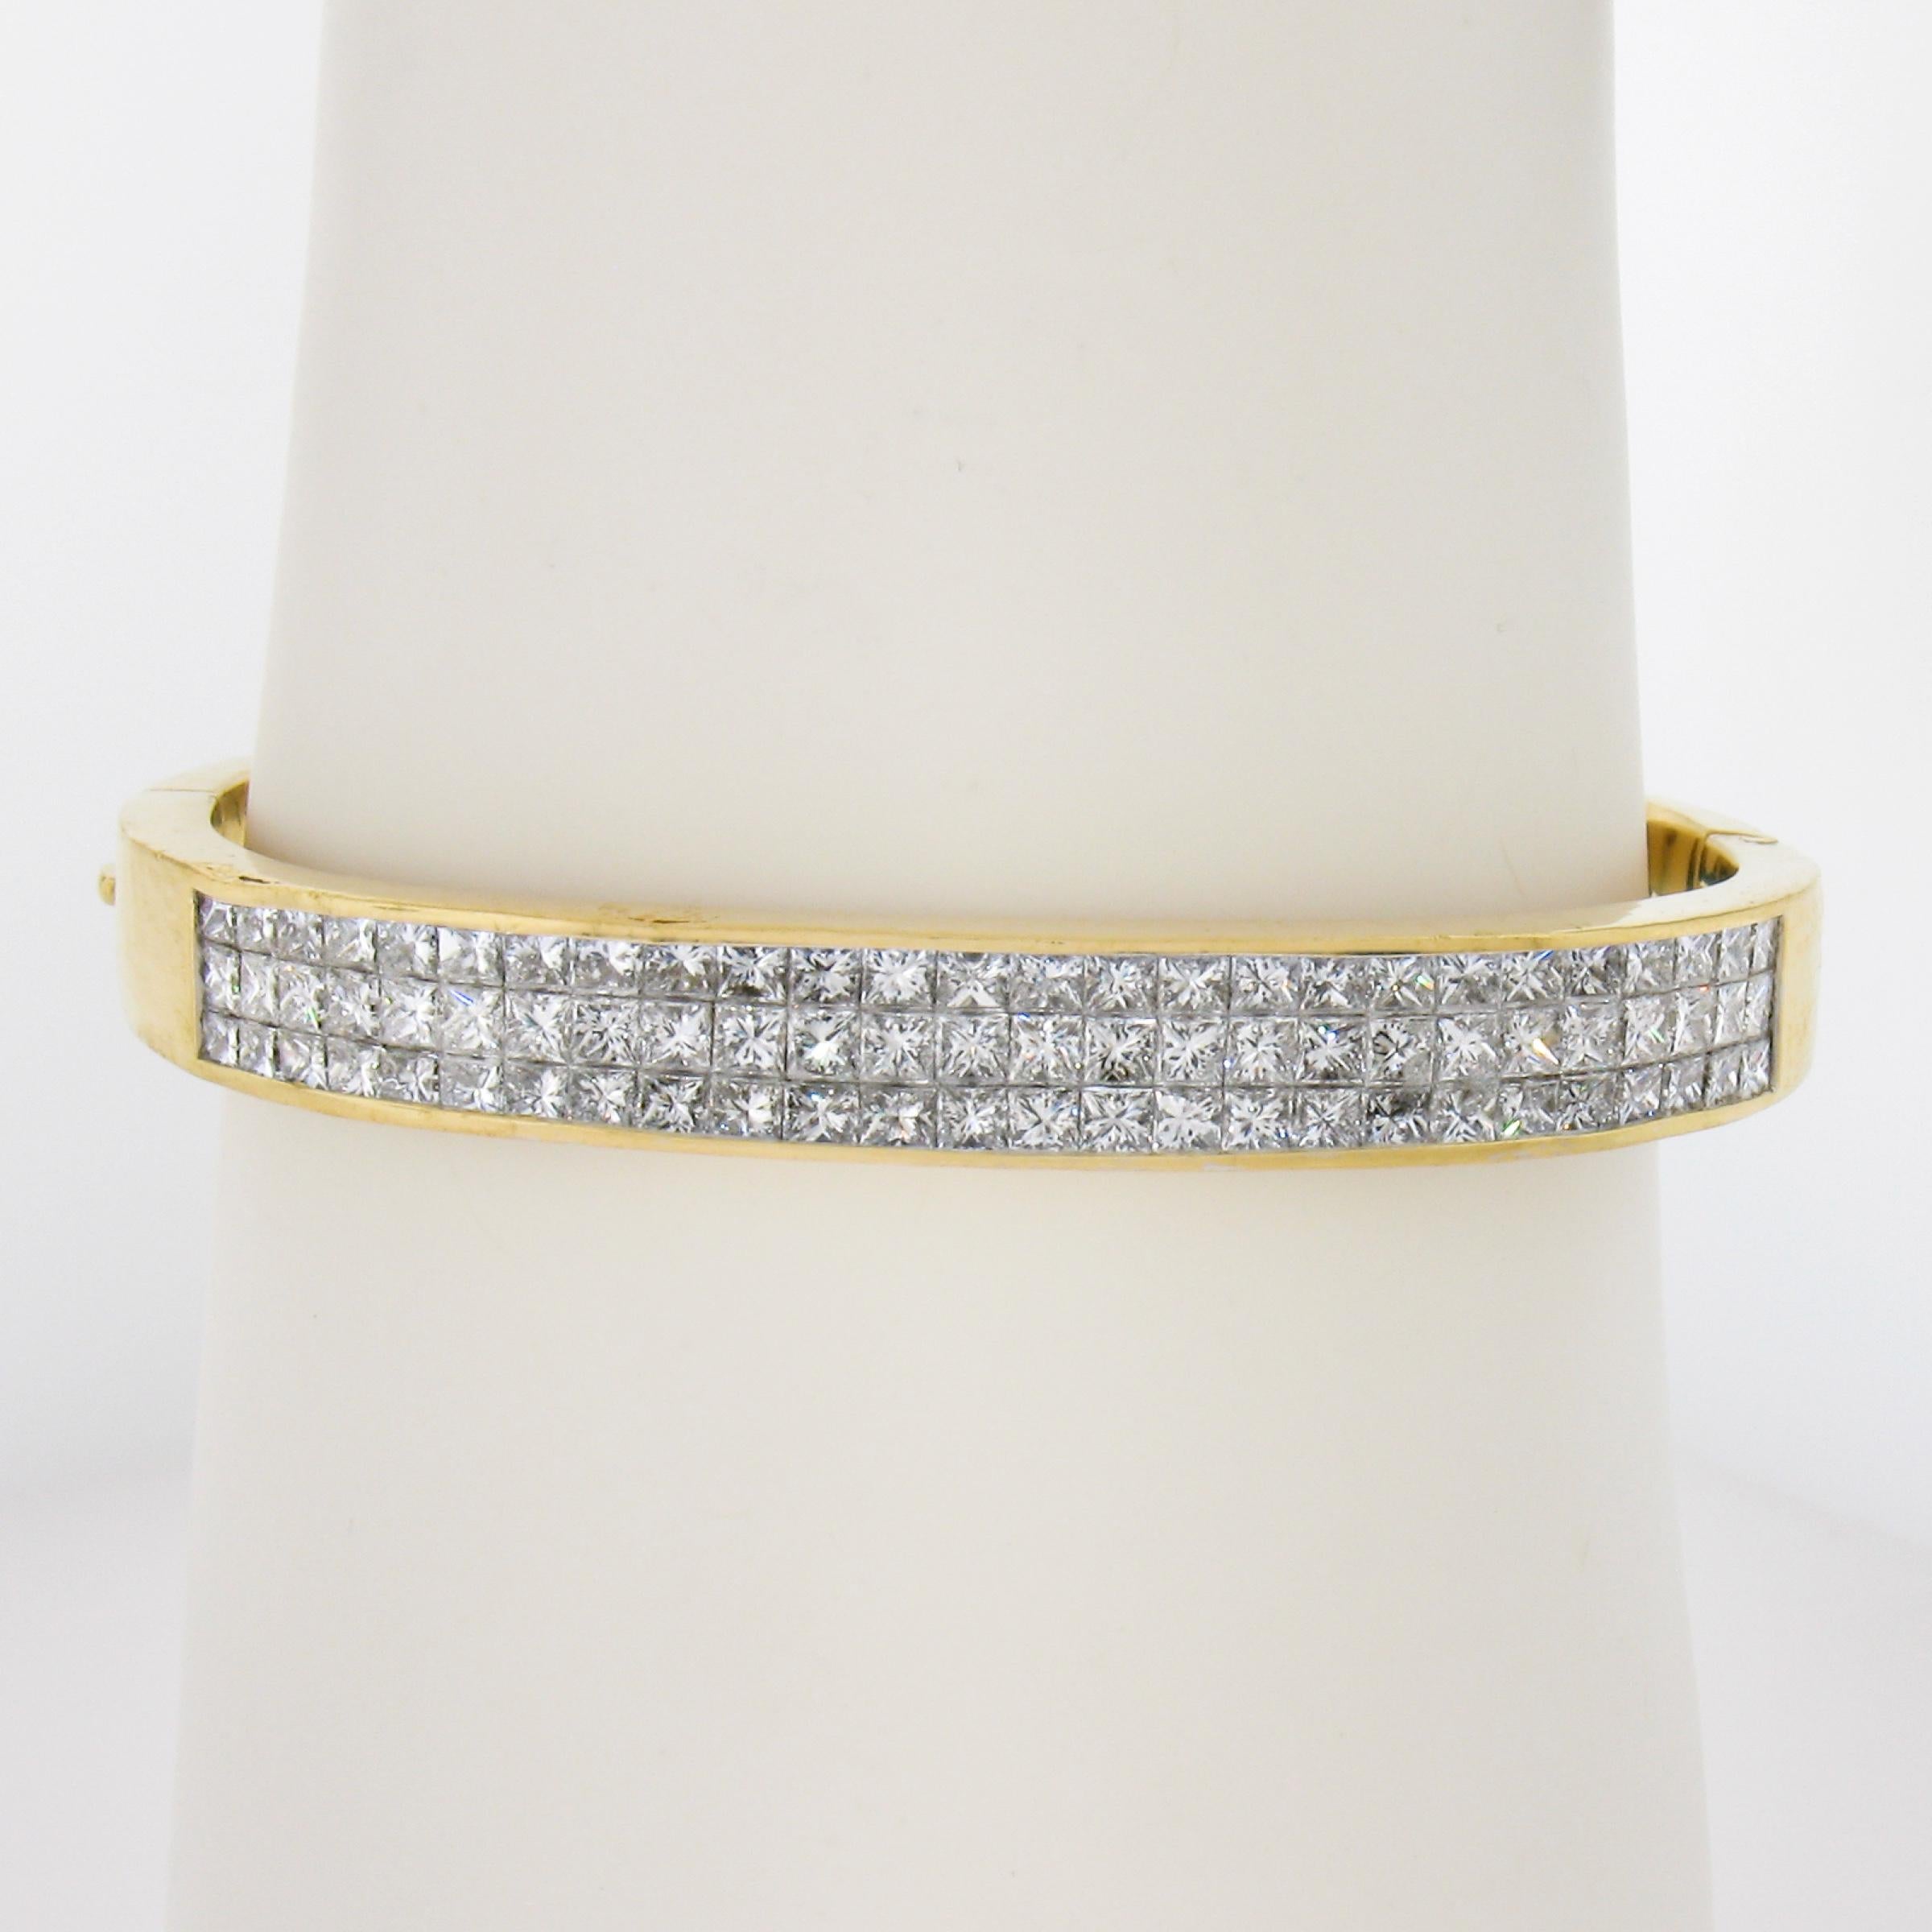 --Stone(s):--
(78) Natural Genuine Diamonds - Princess Cut - Invisible Channel Set - F/G Color - VS1/VS2 Clarity
Total Carat Weight:	6 (approx.)

Material: 18K Solid Yellow Gold
Weight: 37.91 Grams
Size: Fits up to a 7 inch wrist
Width: 8.4mm